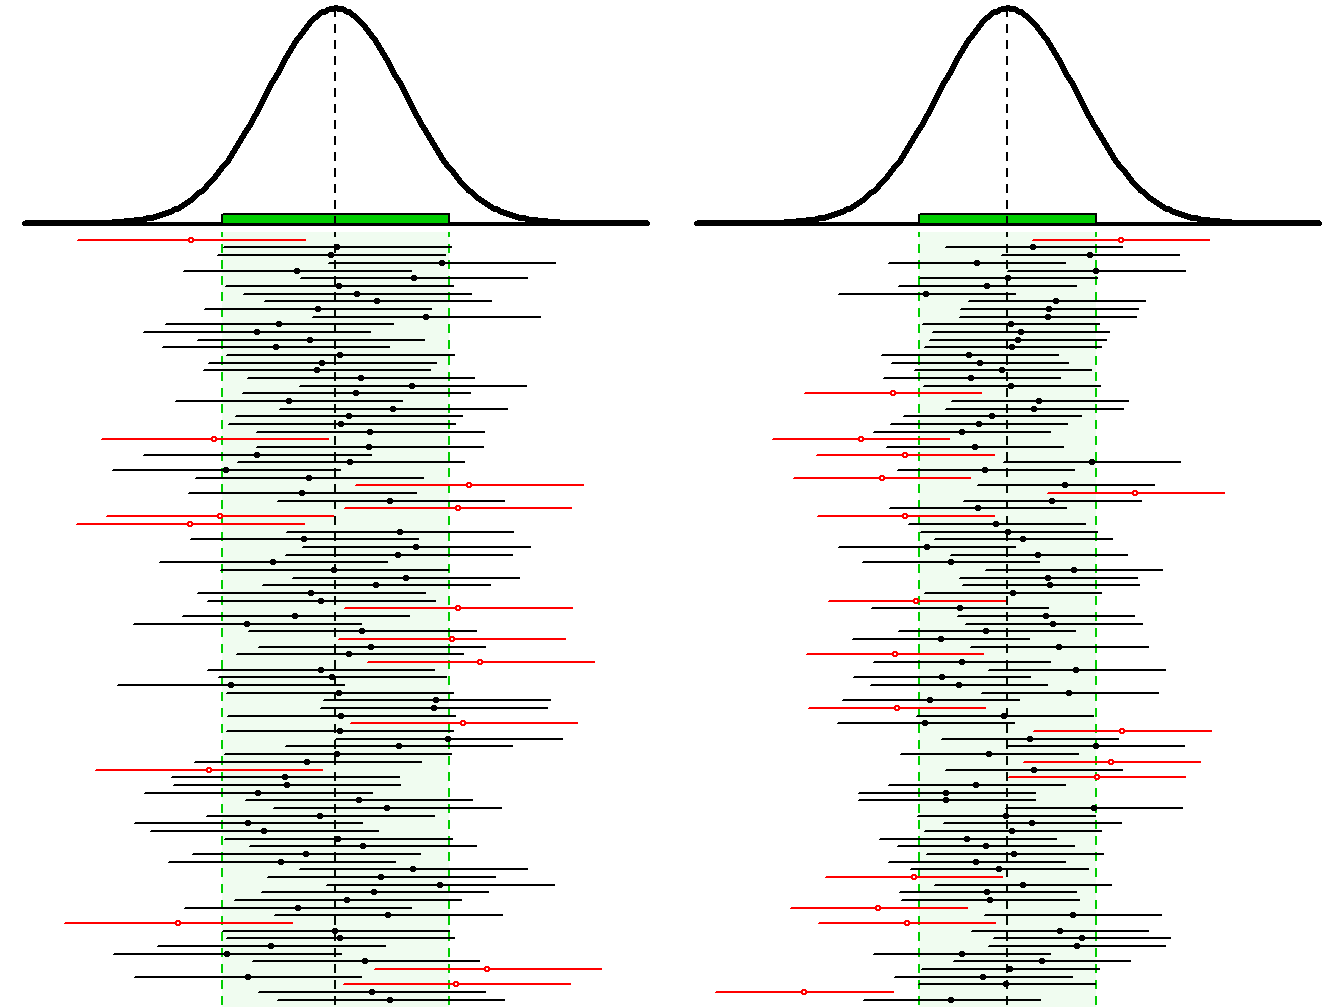 Sampling distribution of the sample mean (**tops**) and 100 random 90% (**Left**) and 80% (**Right**) confidence intervals (horizontal lines) from samples of n=50 from the Square Lake population. Confidence intervals that do NOT contain &mu; are shown in red.